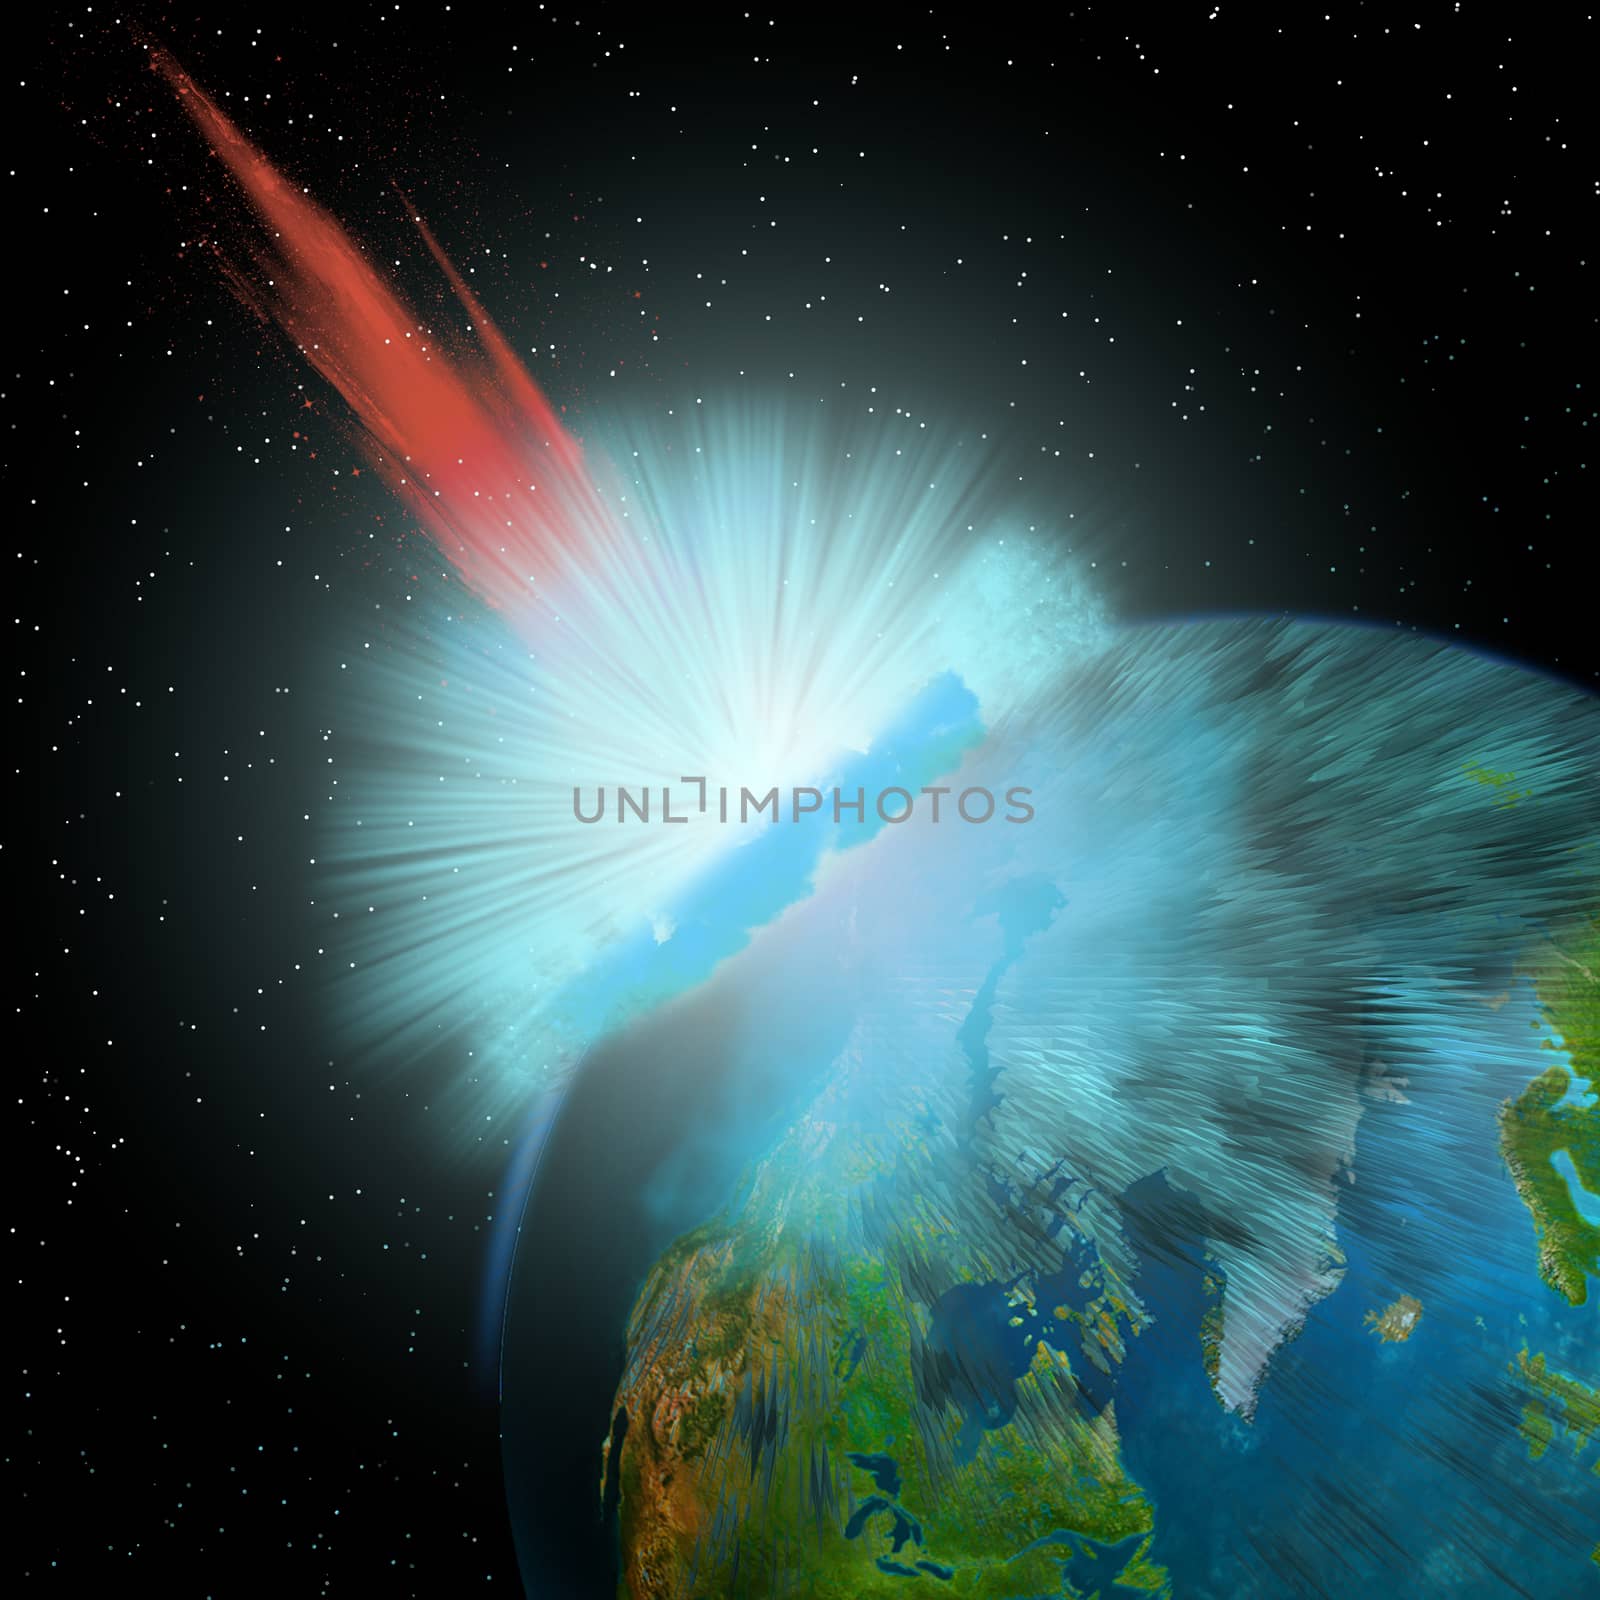 An asteroid hits the Earth near the North Pole causing enormous damage to surrounding areas.